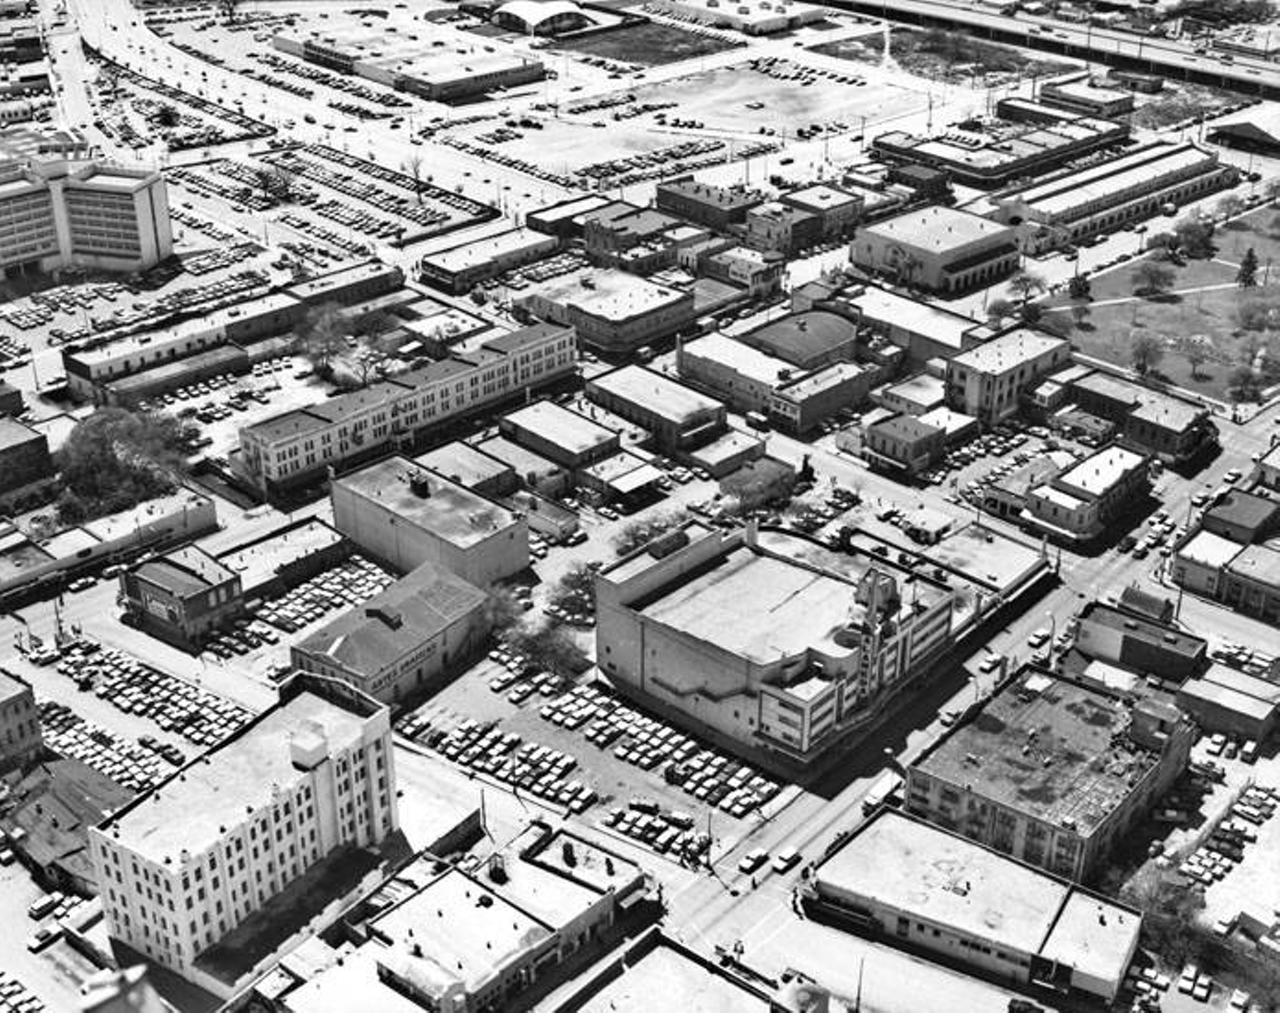 Can you spot the Alameda Theater? Here's an aerial view of the landmark spot and surrounding buildings from March 1968.